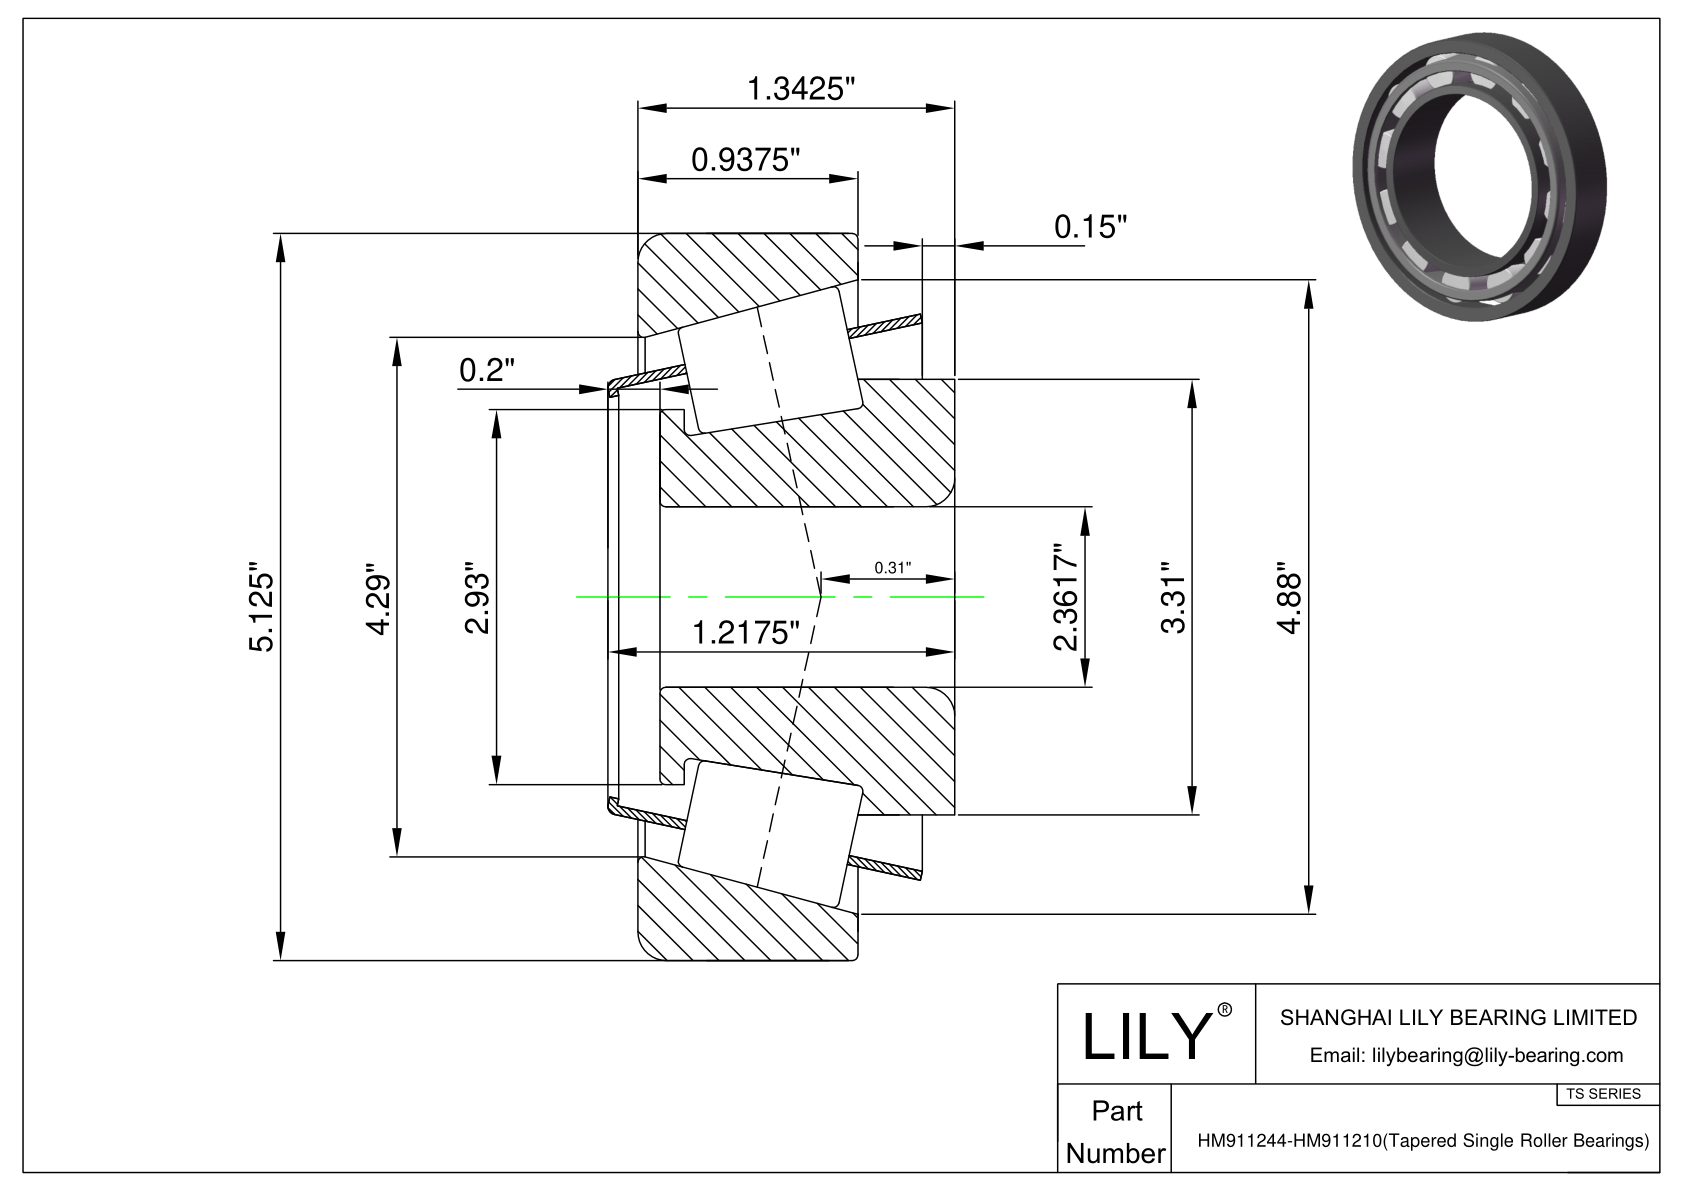 HM911244-HM911210 TS (Tapered Single Roller Bearings) (Imperial) cad drawing